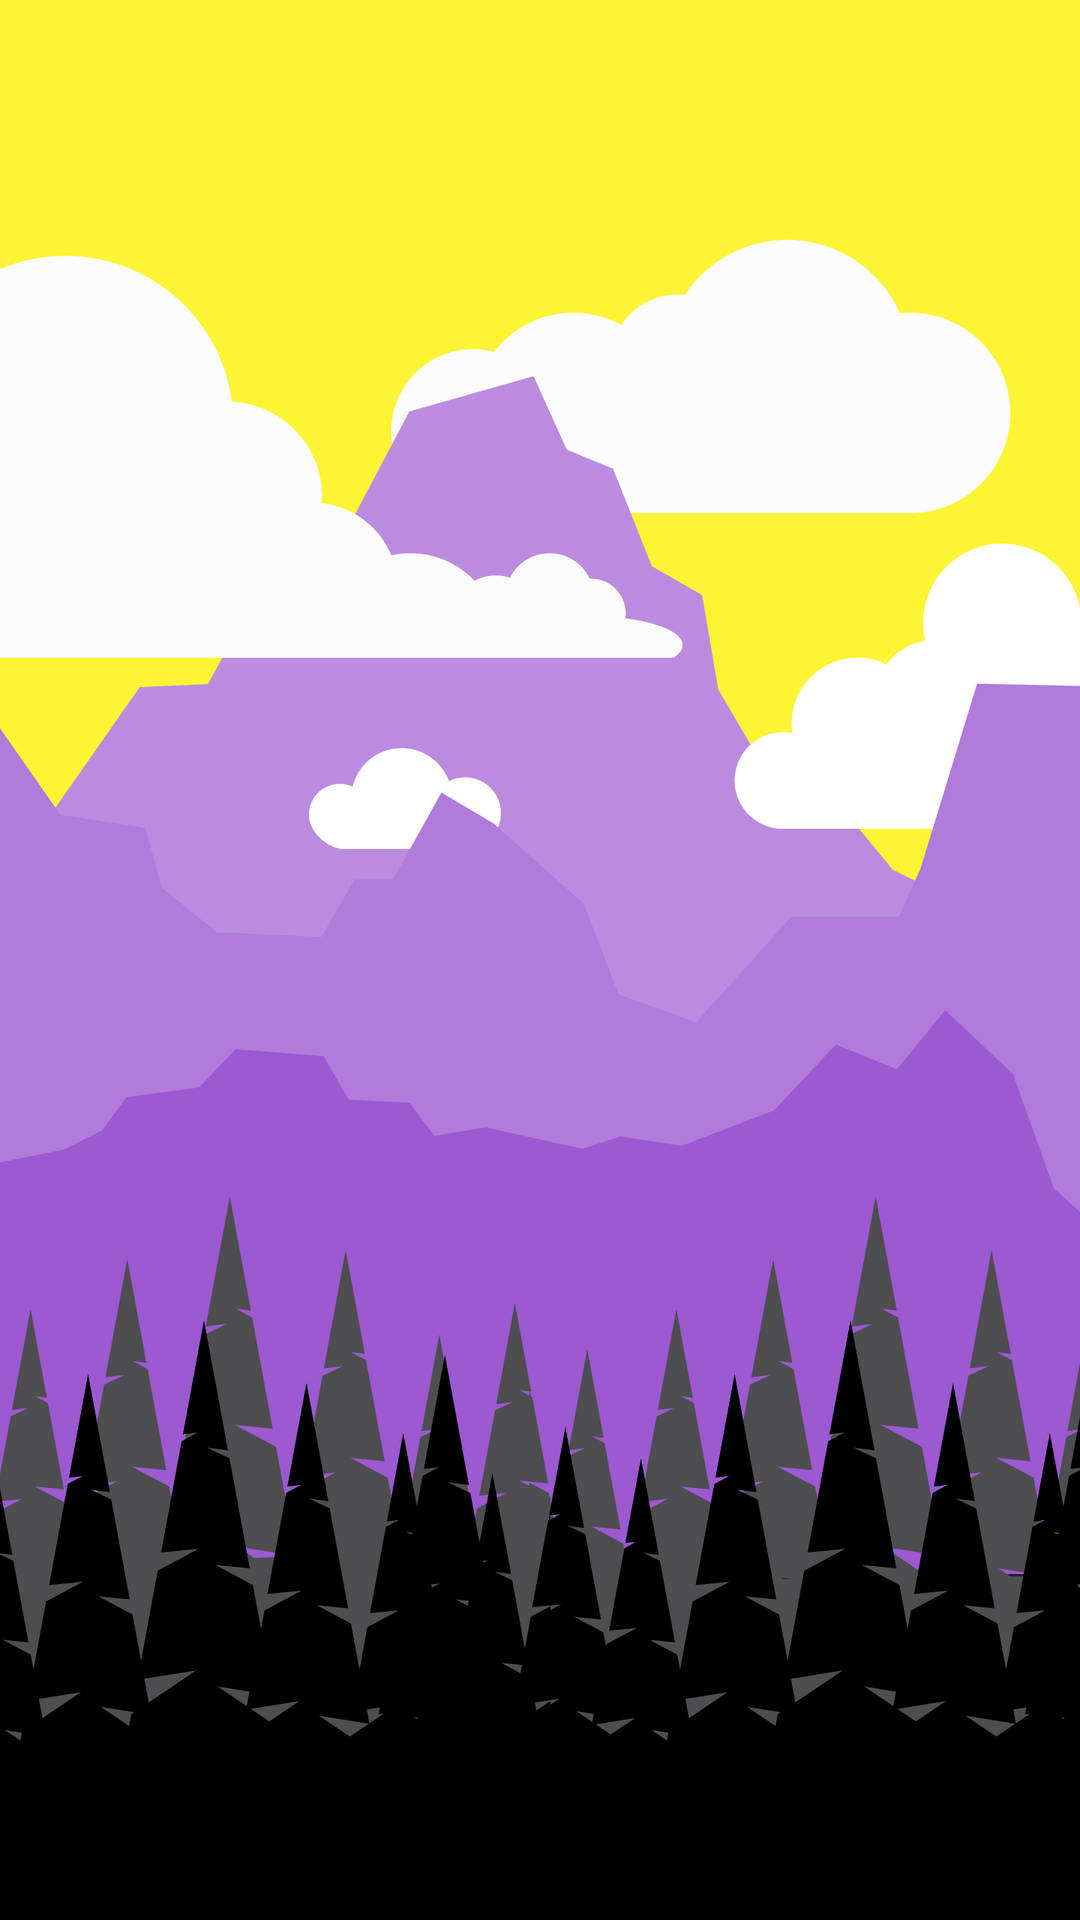 Download Nonbinary Themed Mountain Forest Vector Art Wallpaper | Wallpapers .com